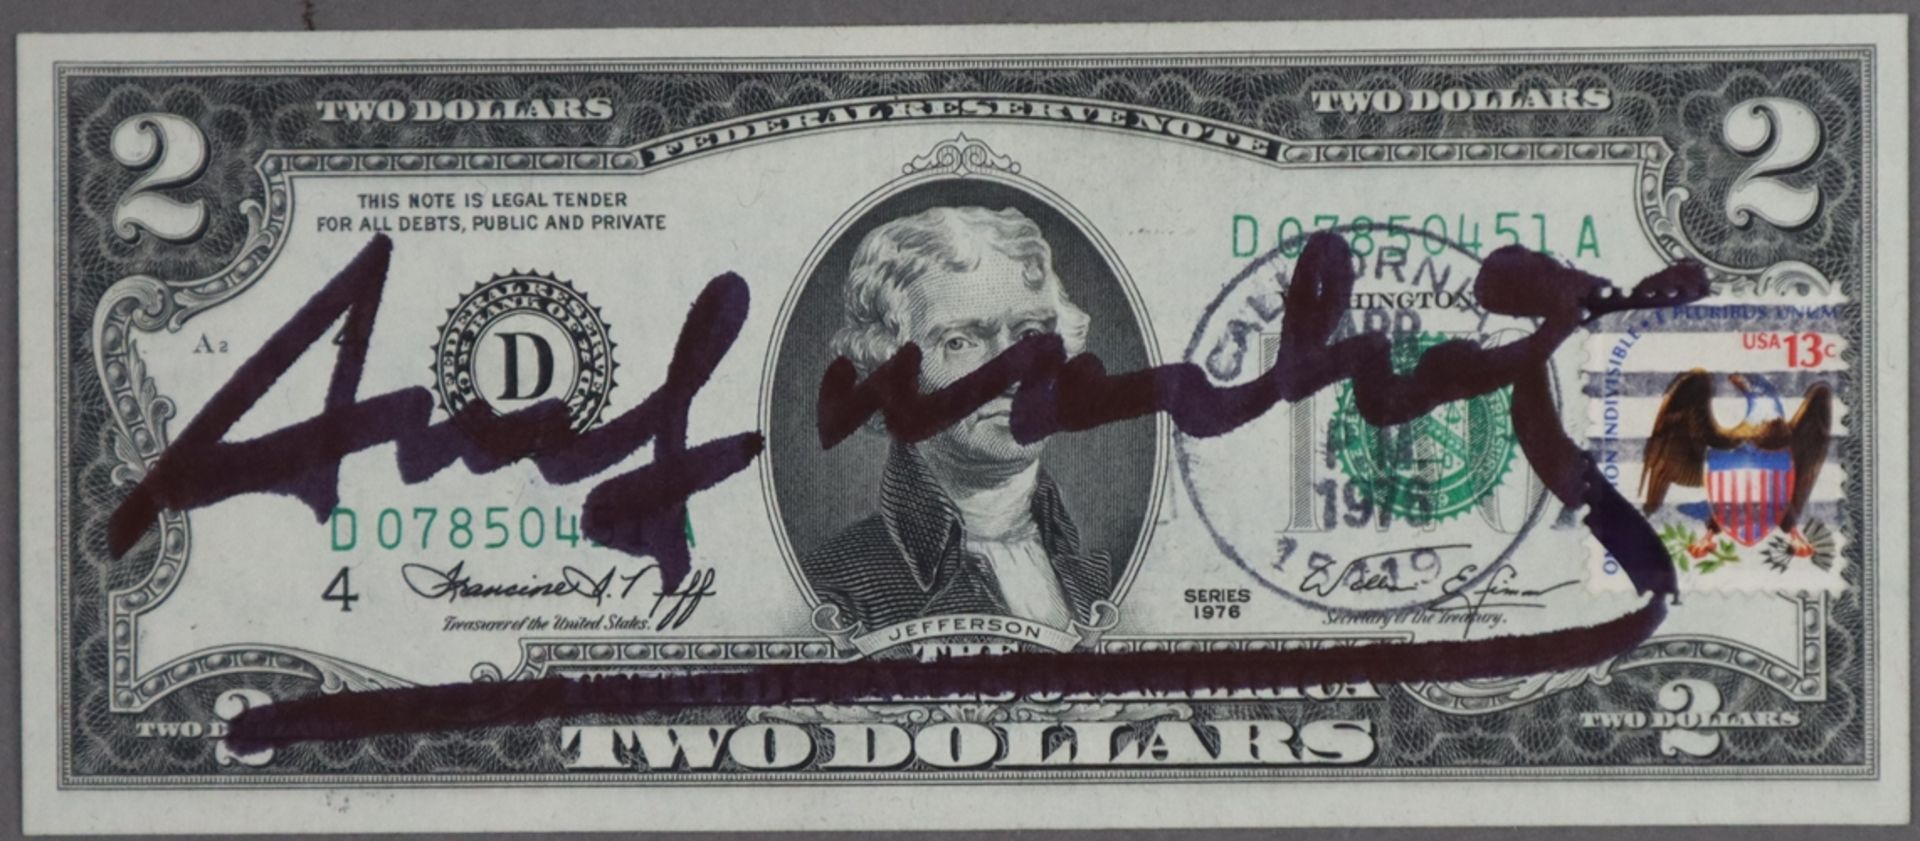 Warhol, Andy (1928 Pittsburgh - 1987 New York) - „Two Jefferson's Dollars“, 2 Dollarnote mit Signat